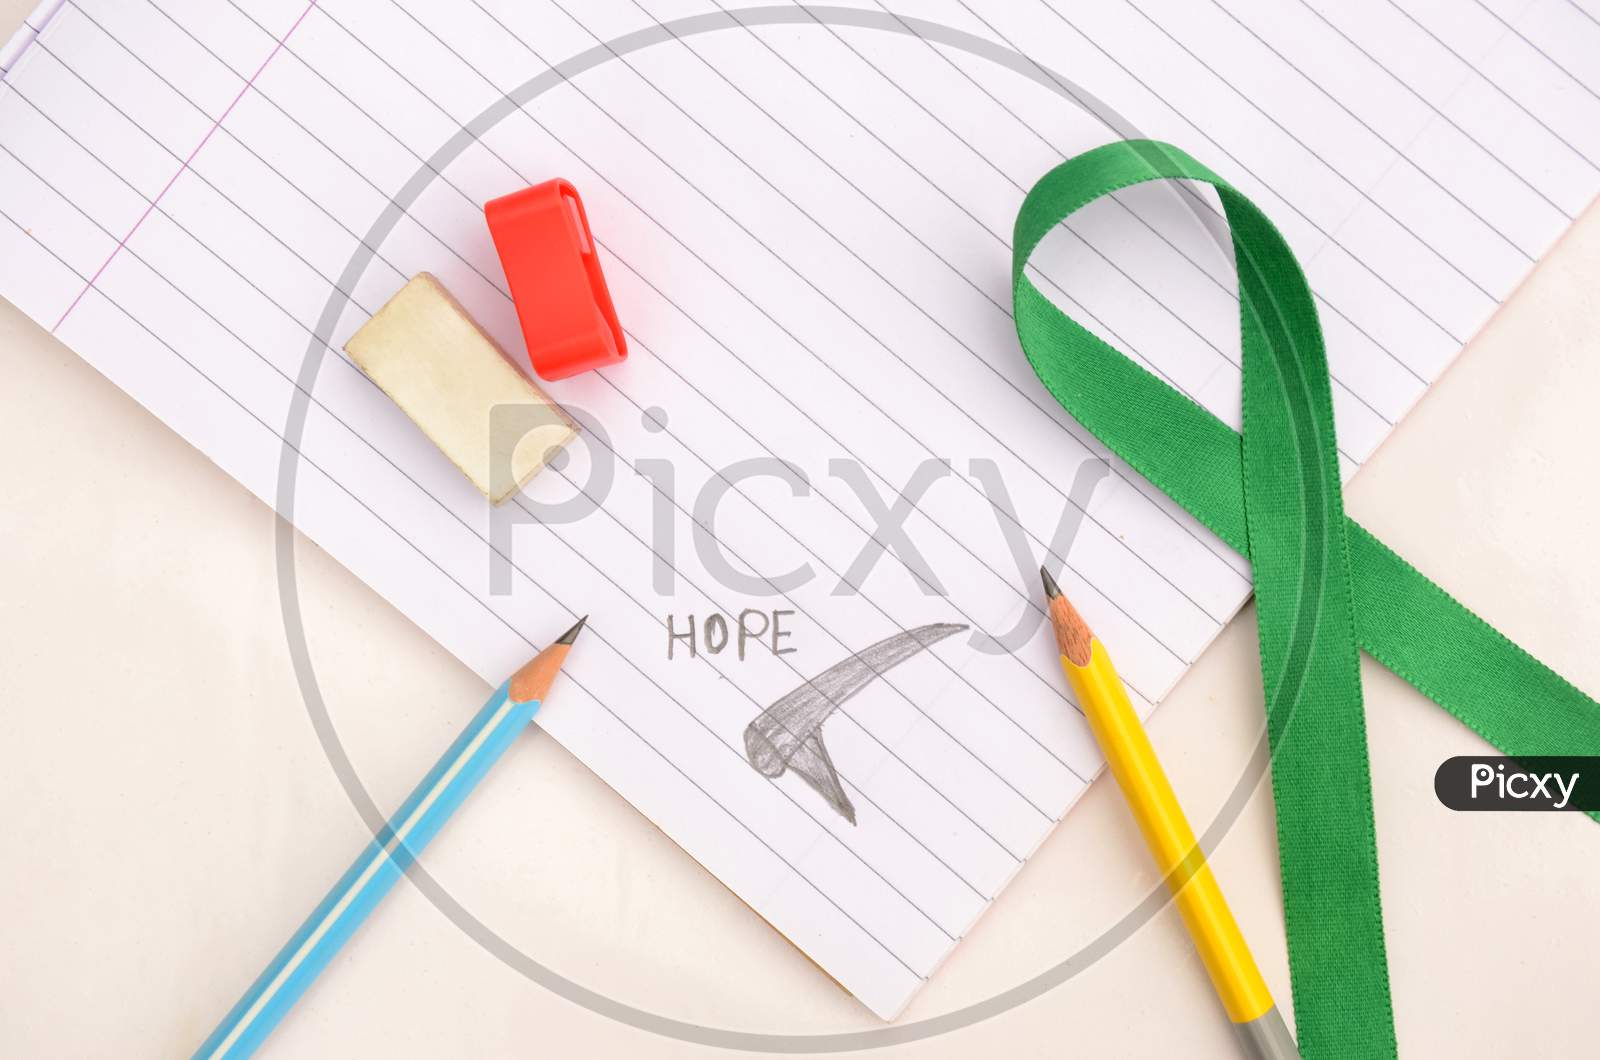 Pencil With Writing Hope Mental Health Awareness Concept Not Book ,Green Ribbon,Eraser,Sharpener On The White Background.